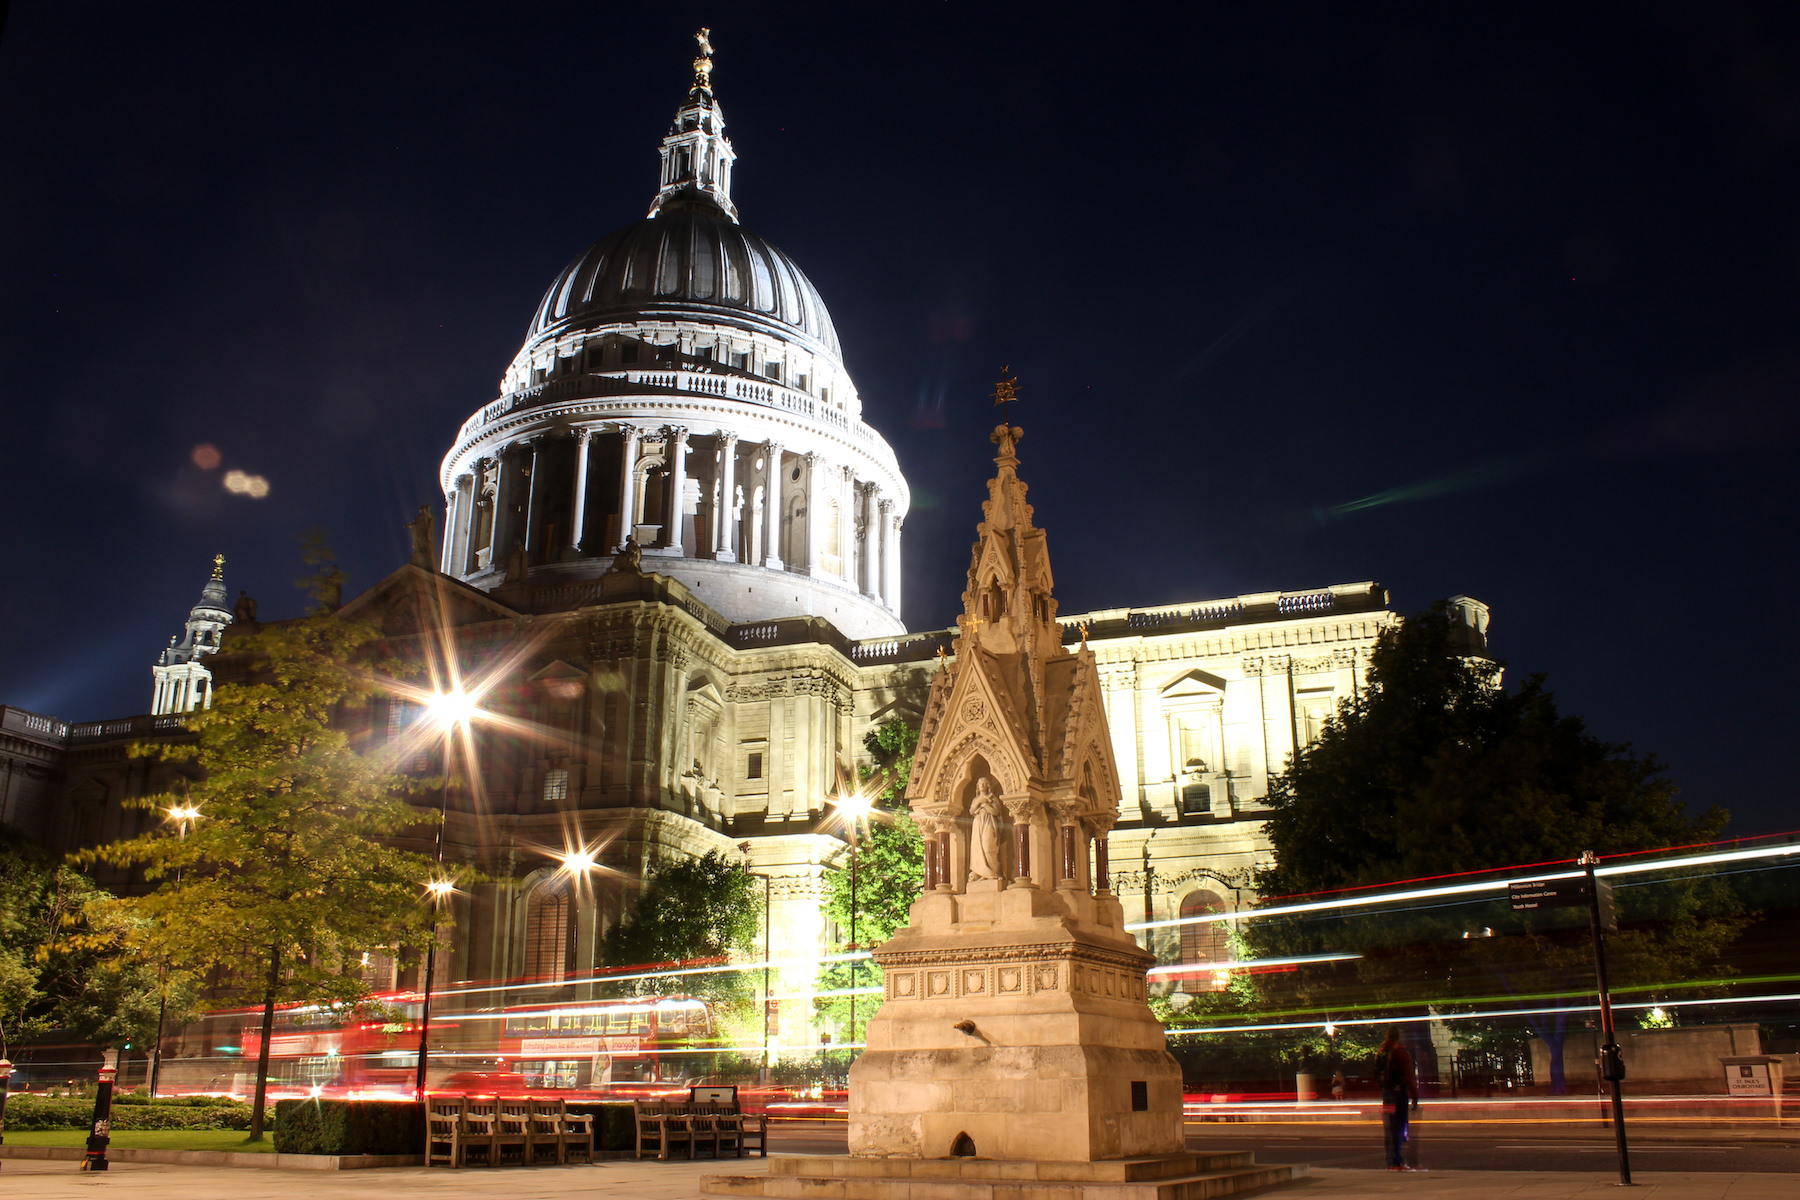 Midnight at St. Paul's Cathedral in London, UK.